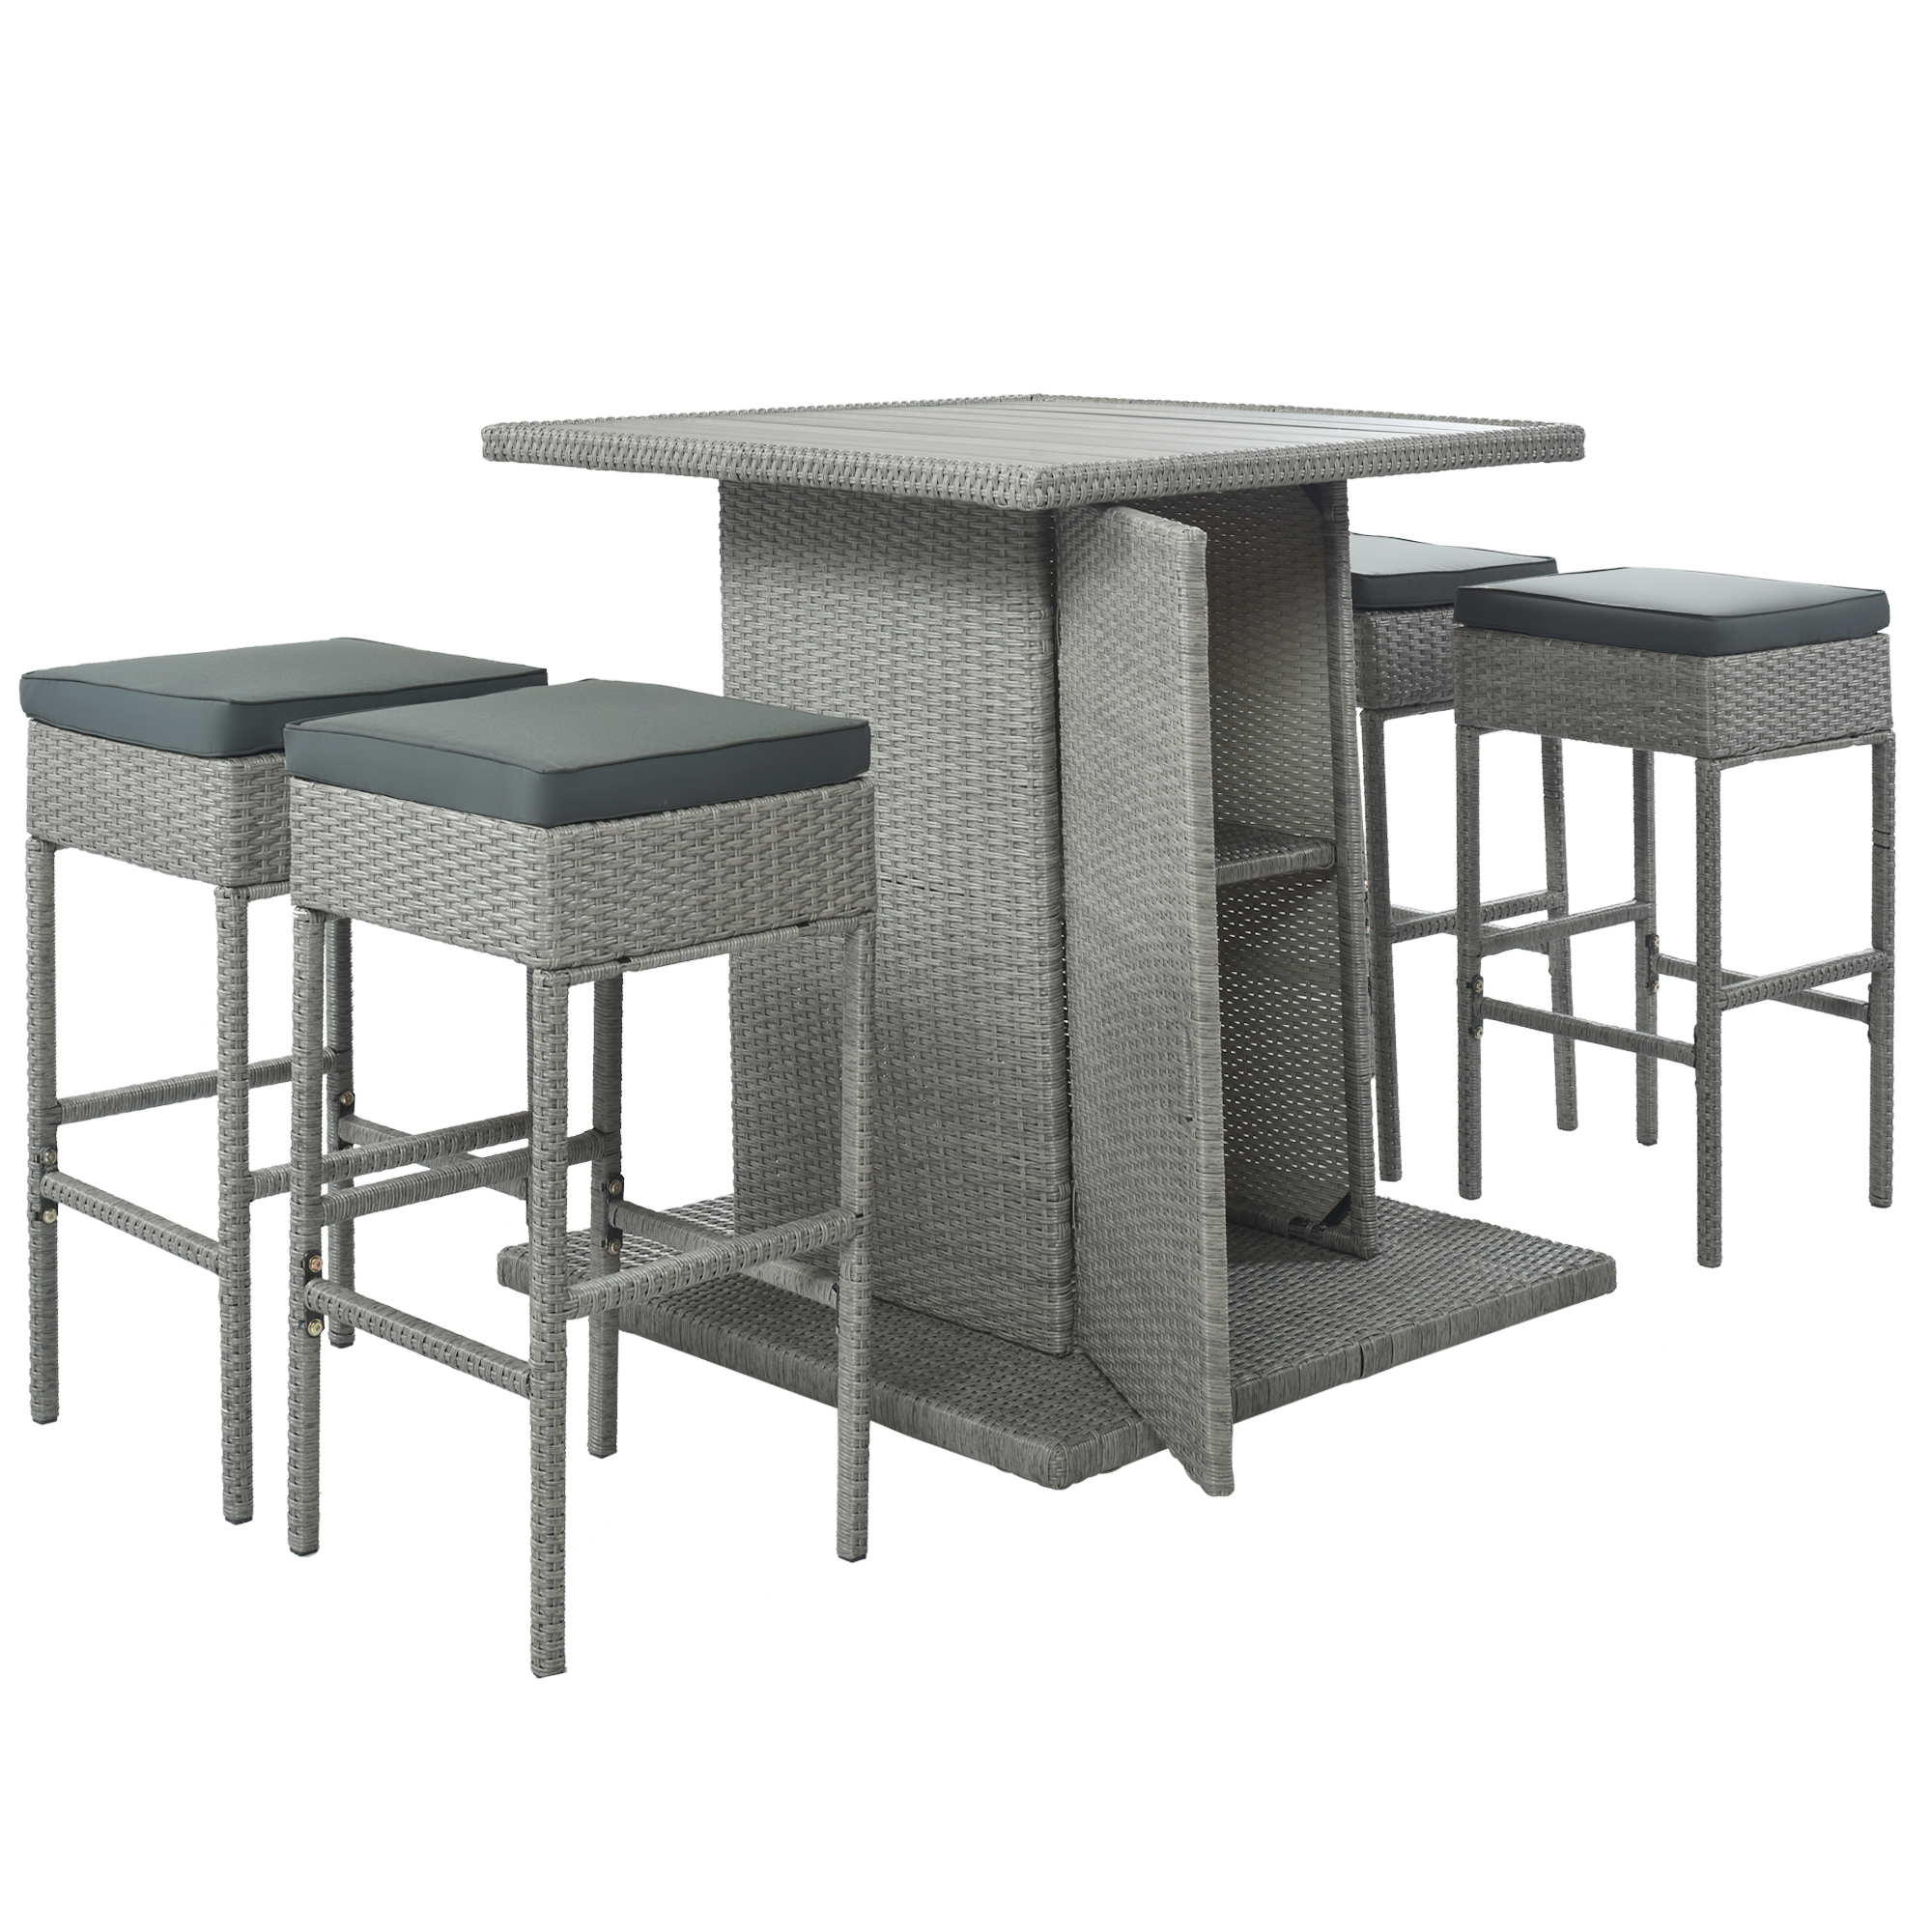 5 Piece Outdoor Patio Height Bar Dining Table Sets, 41'' Hight Outdoor Patio Funiture Table Set with 4 Chairs and Cushions, Kitchen Table with Storage Shelf for Backyard, Poolside, Grey Wicker, S5984 - image 4 of 10